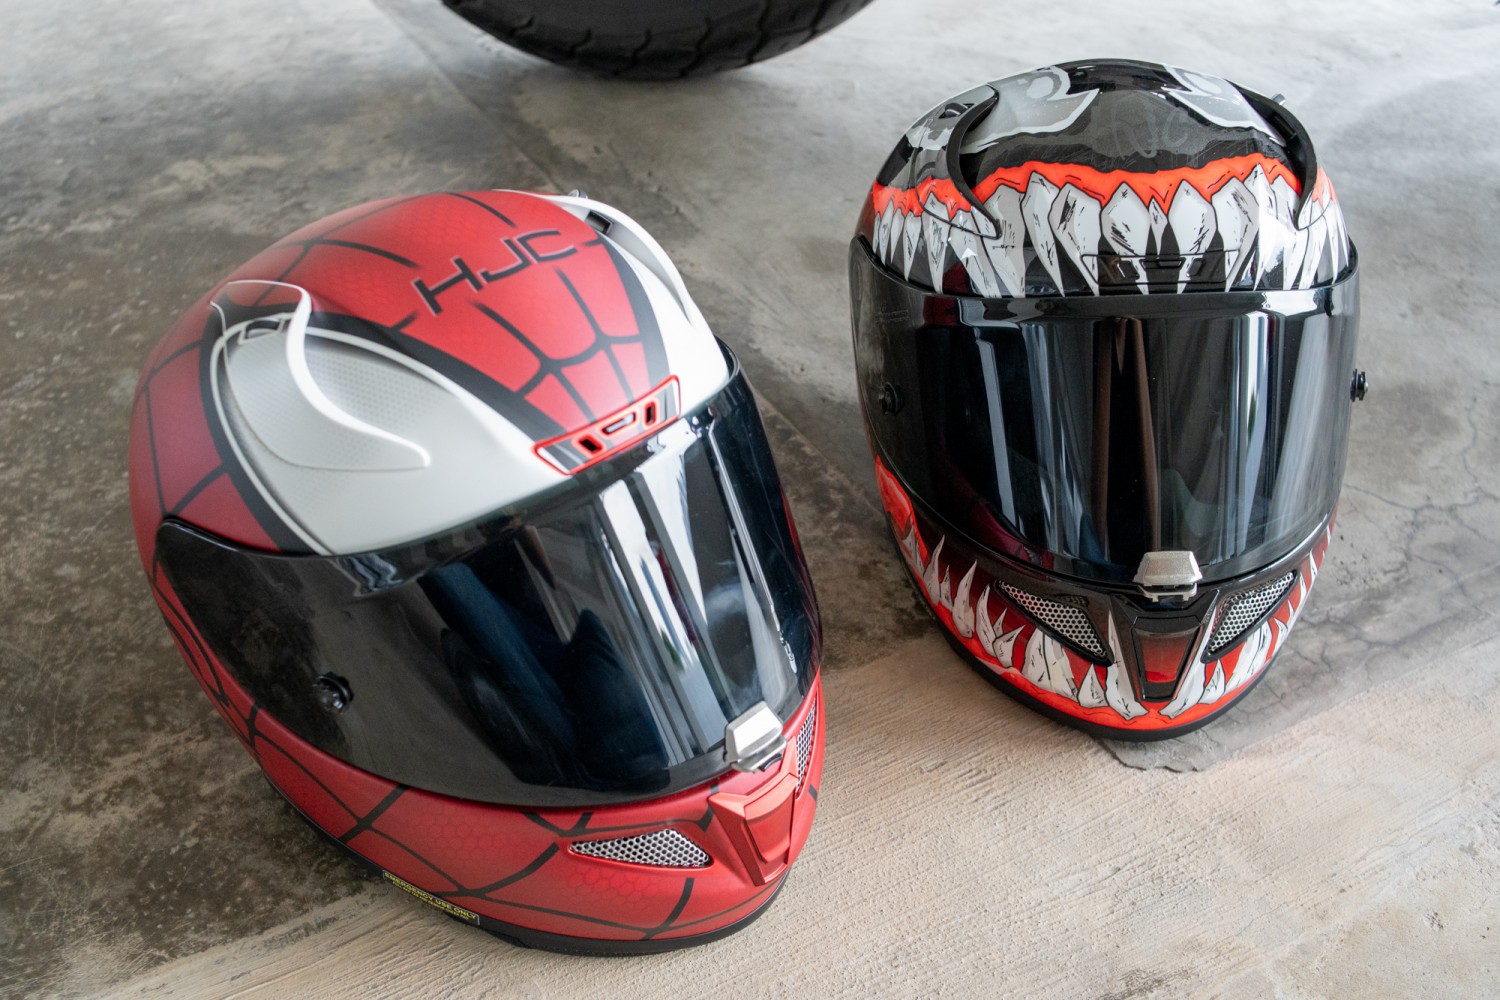 Ride Like A Badass With These Spider-Man Themed HJC Motorcycle Helmets